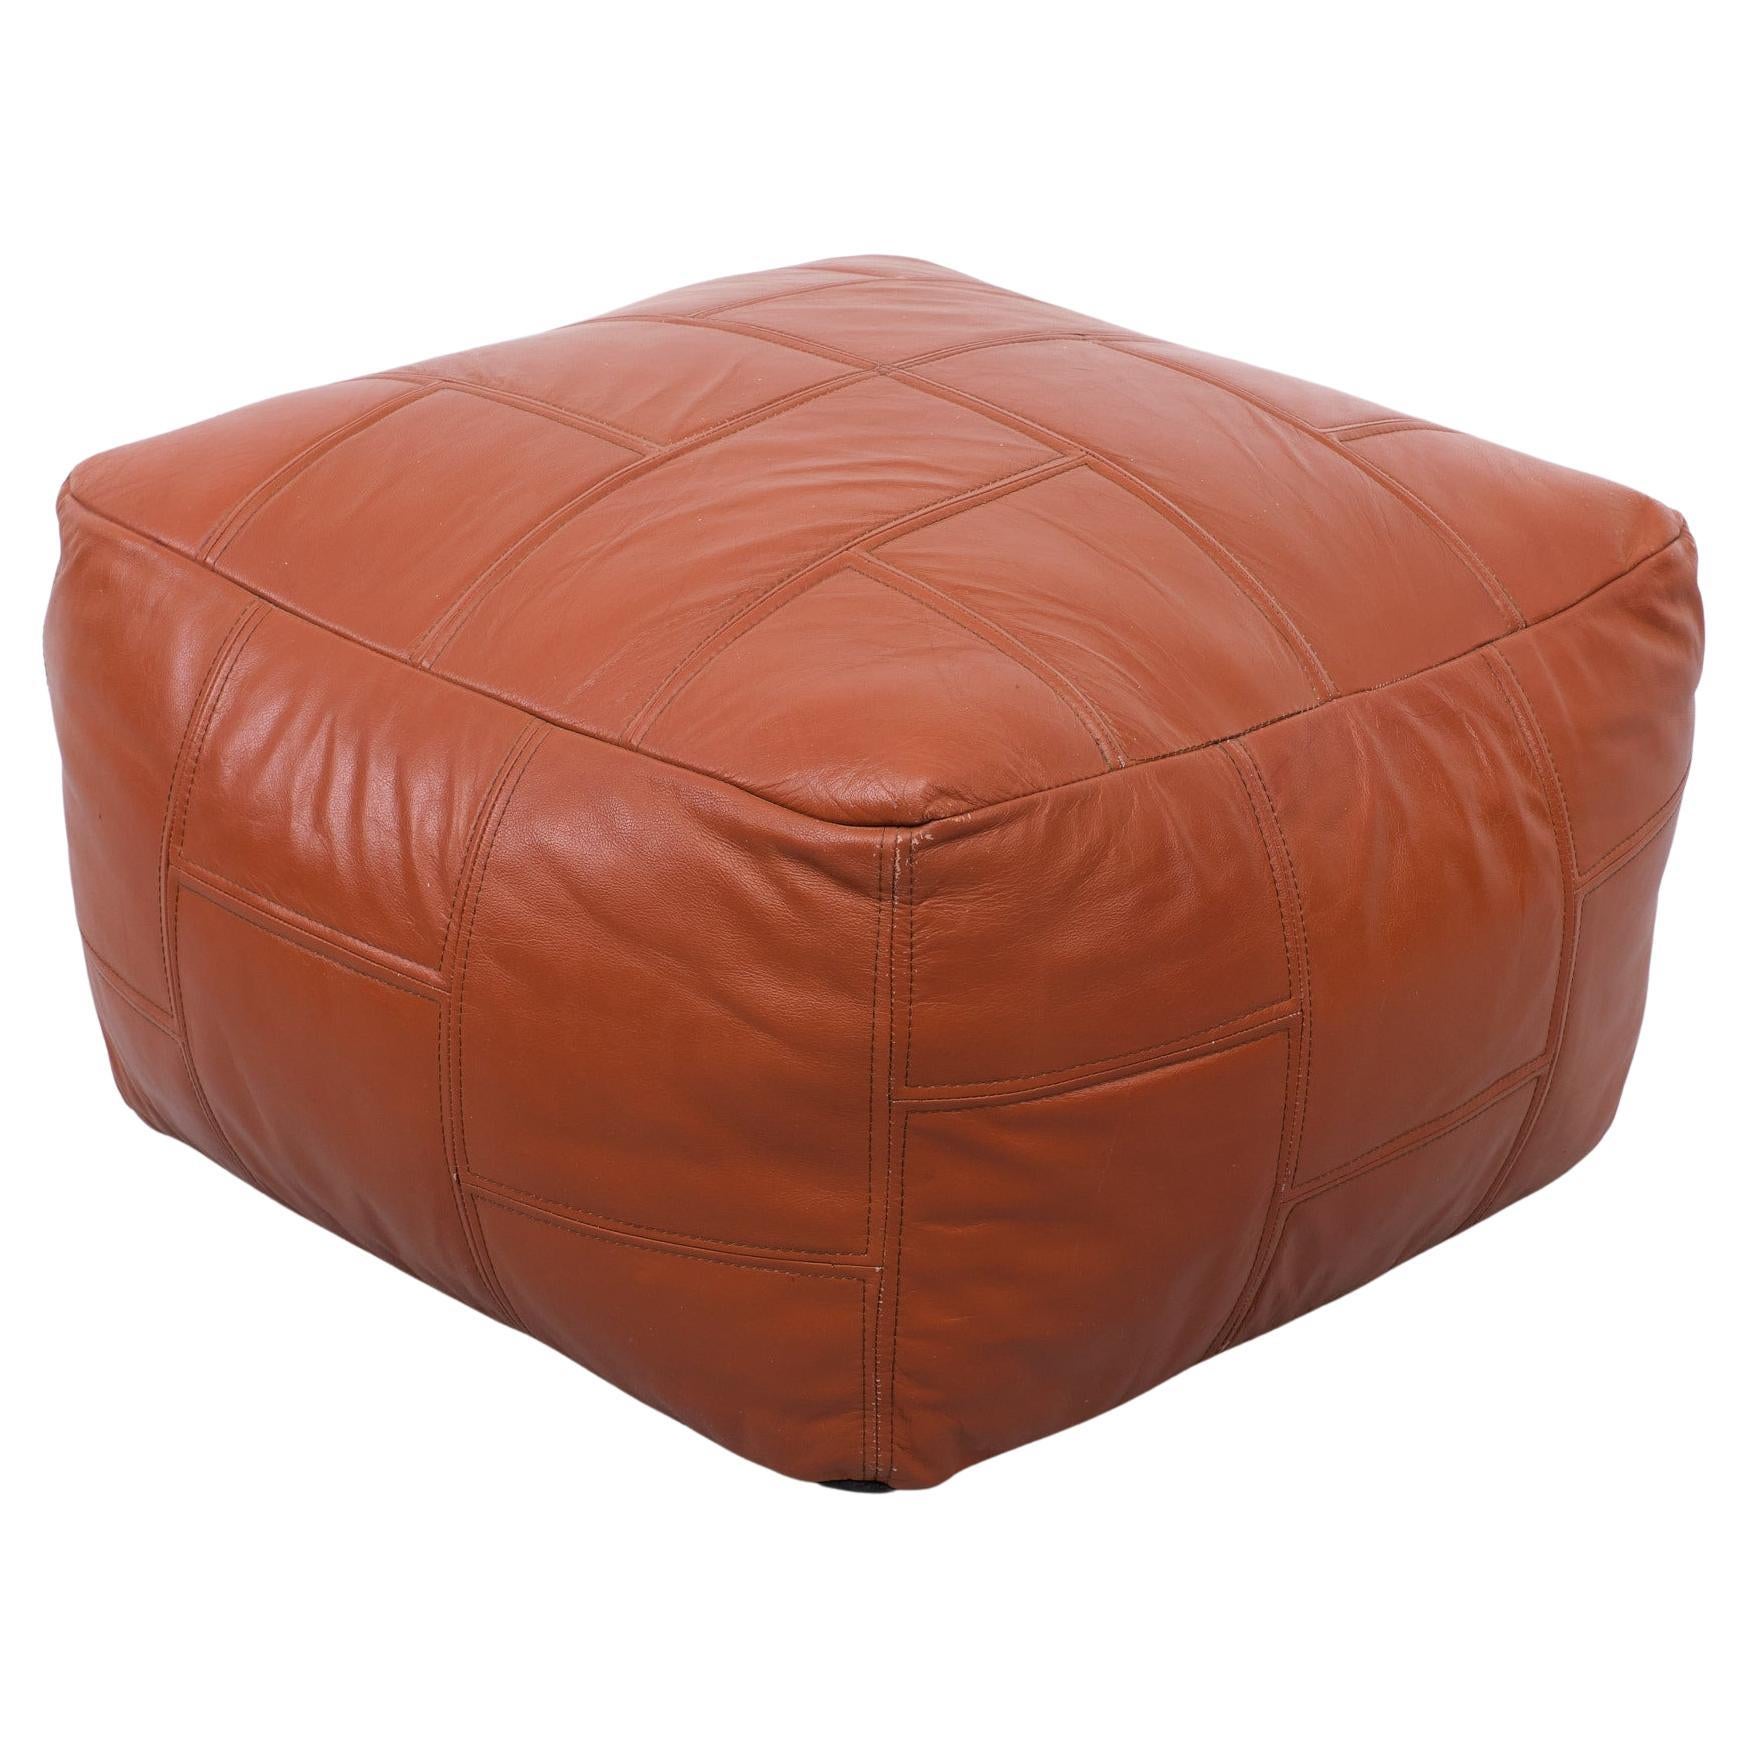 Very nice Stich Leather pouf . Cognac color , 1970s.
For resting your feet or to sit on.

Please don't hesitate to reach out for alternative shipping quote